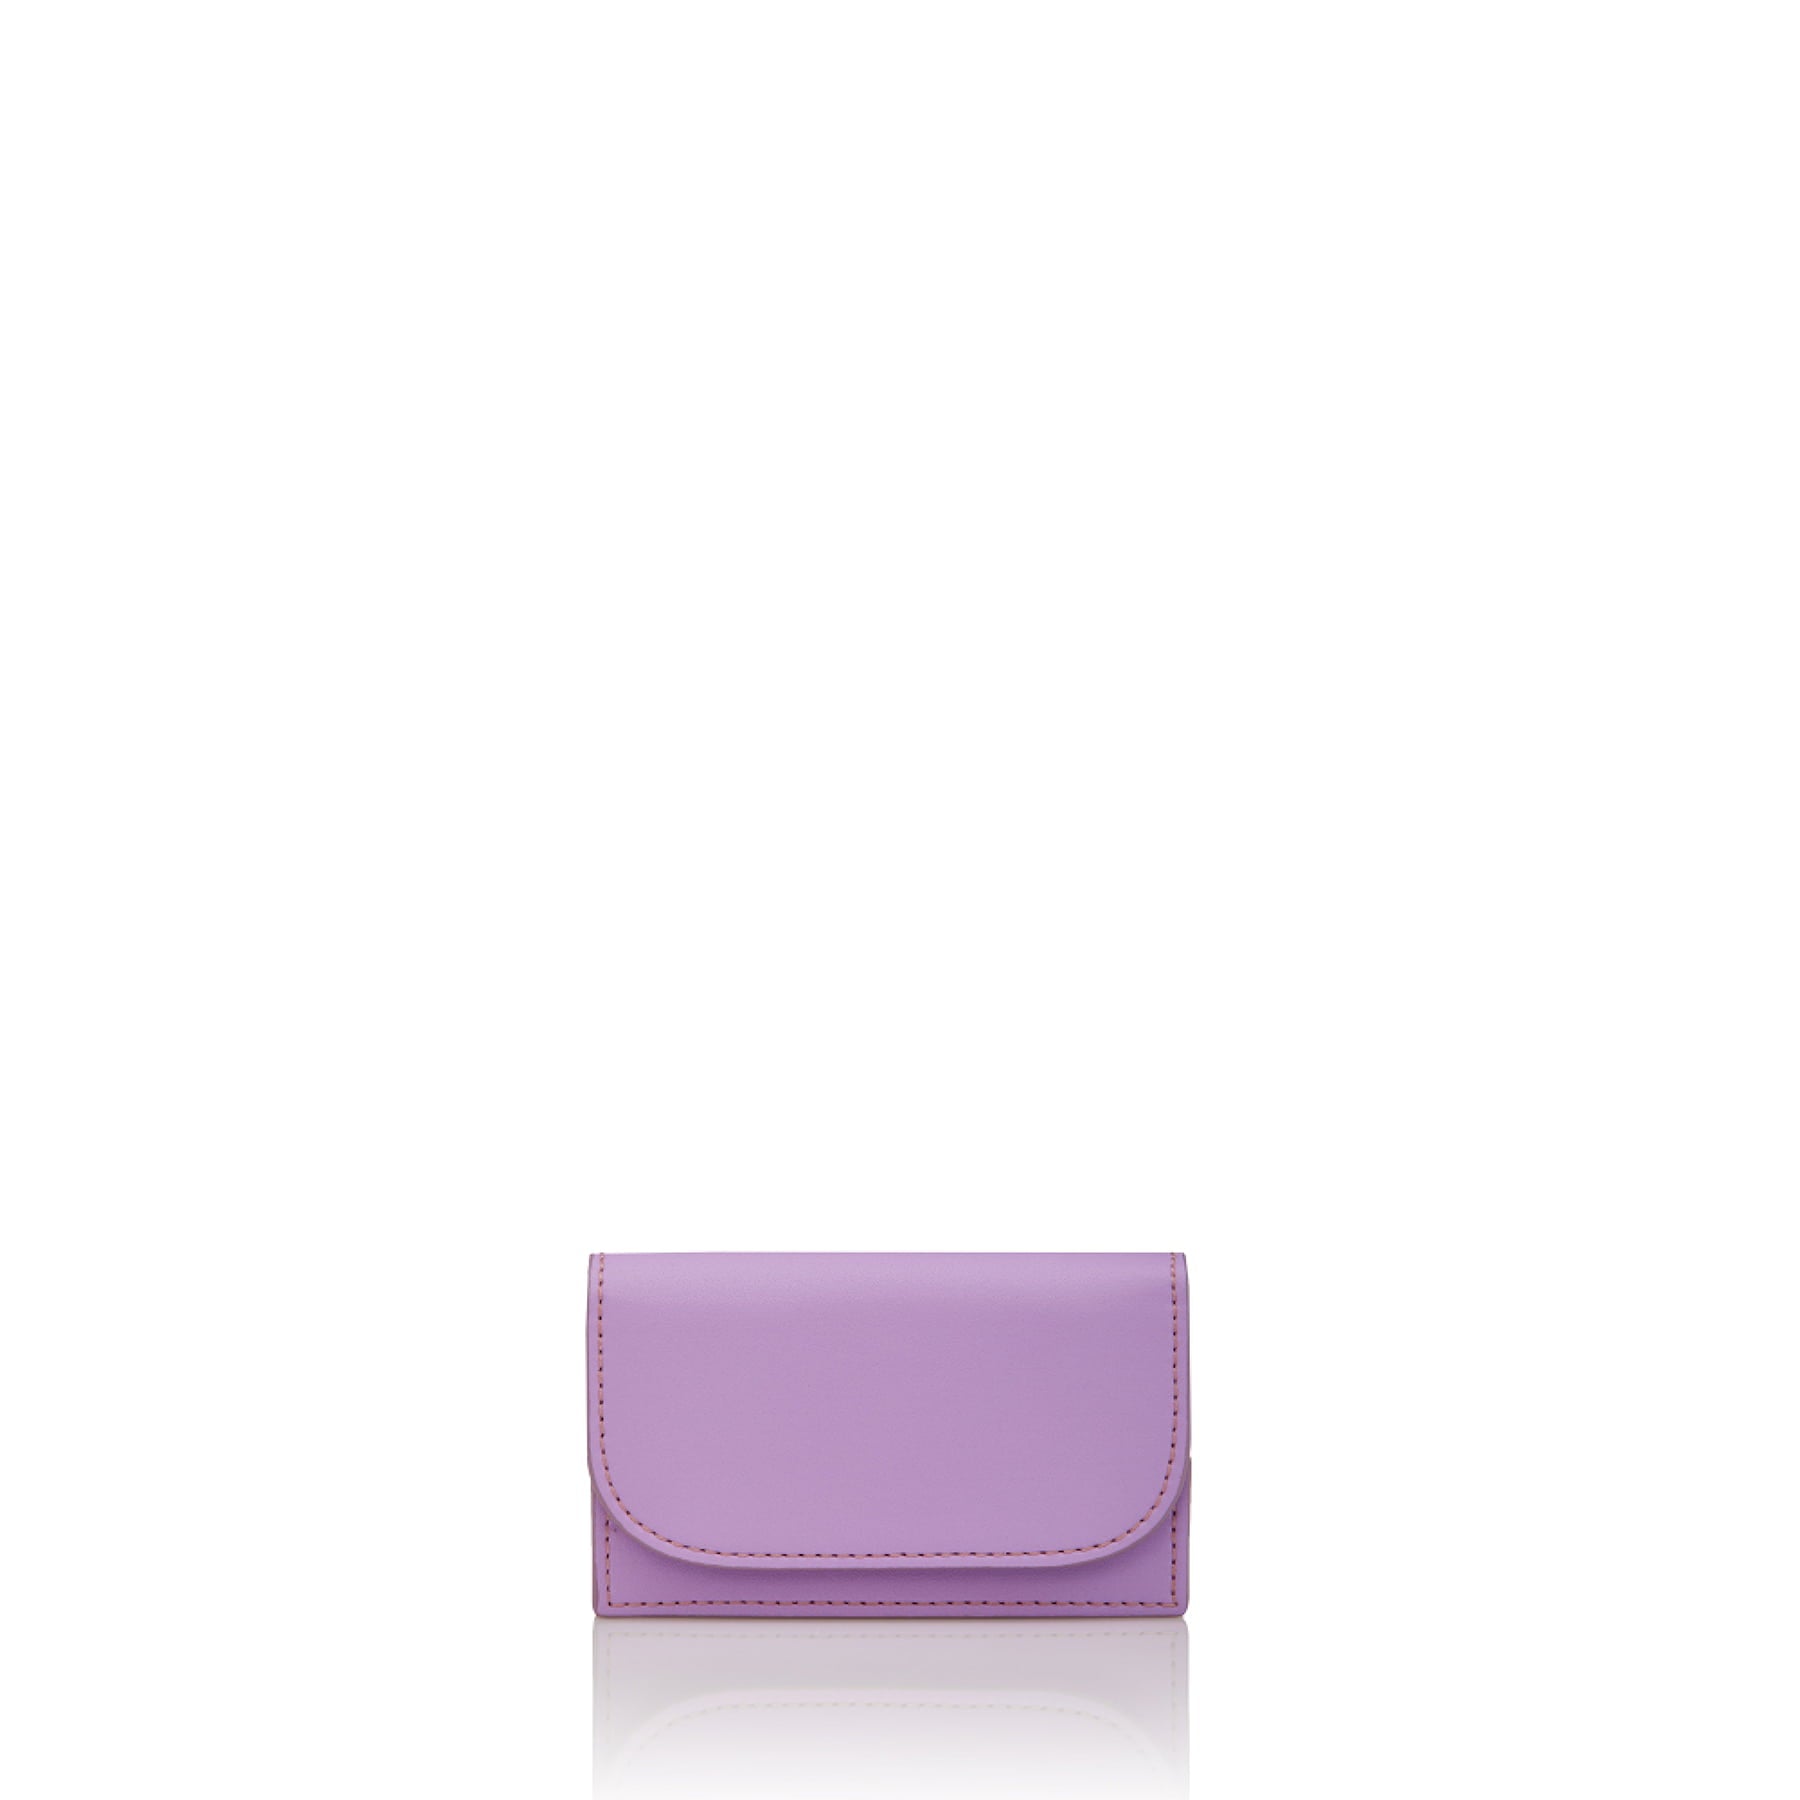 Julian Petit Floral Purple card case with inside pocket made environmentally conscious material Kayla Fabric